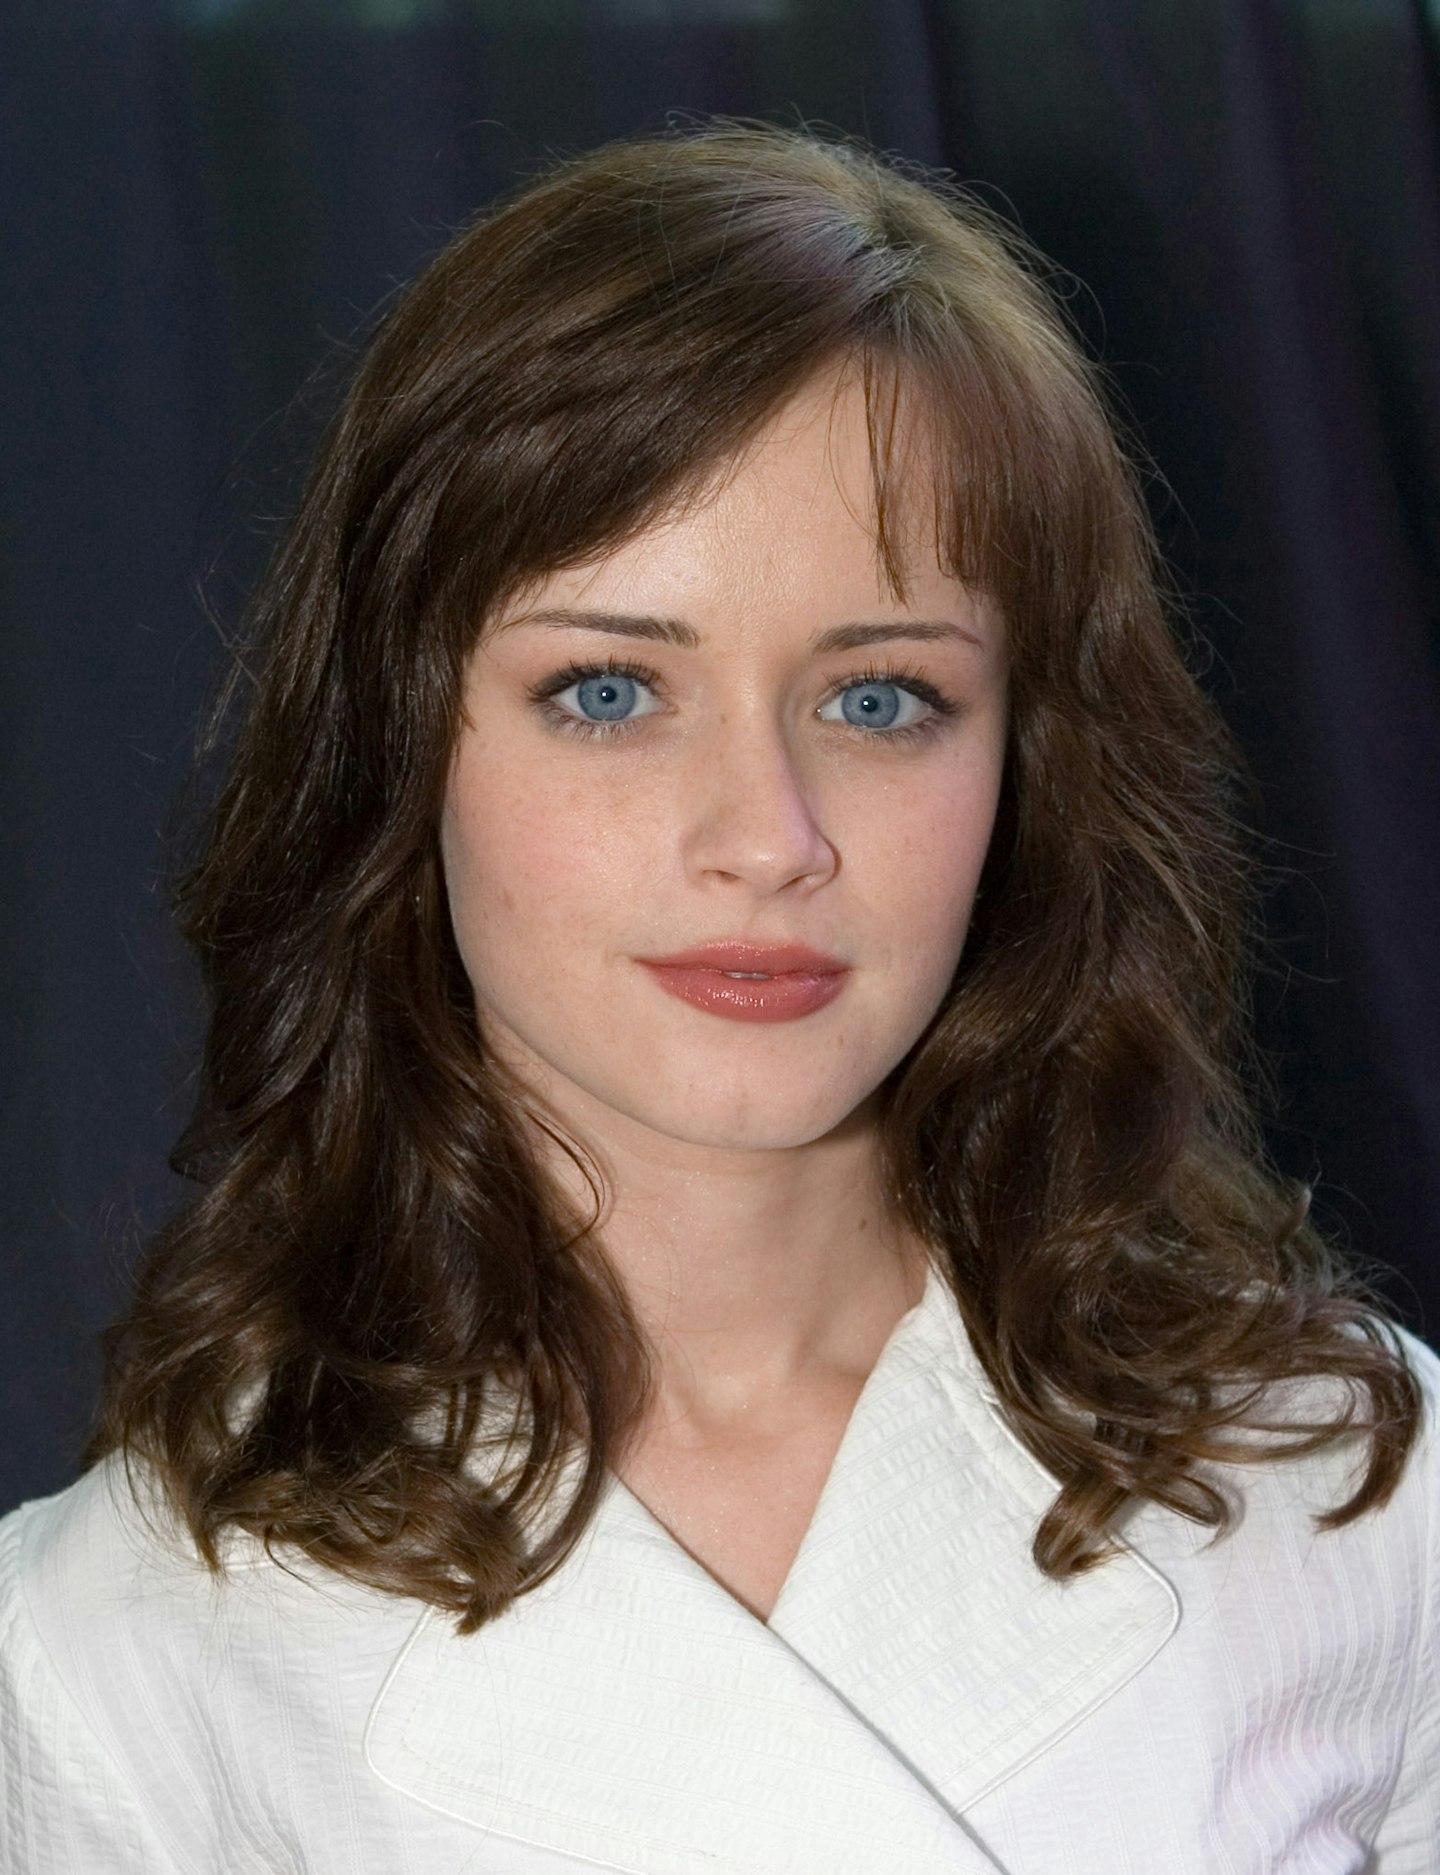 17 Things You Never Knew About Alexis Bledel